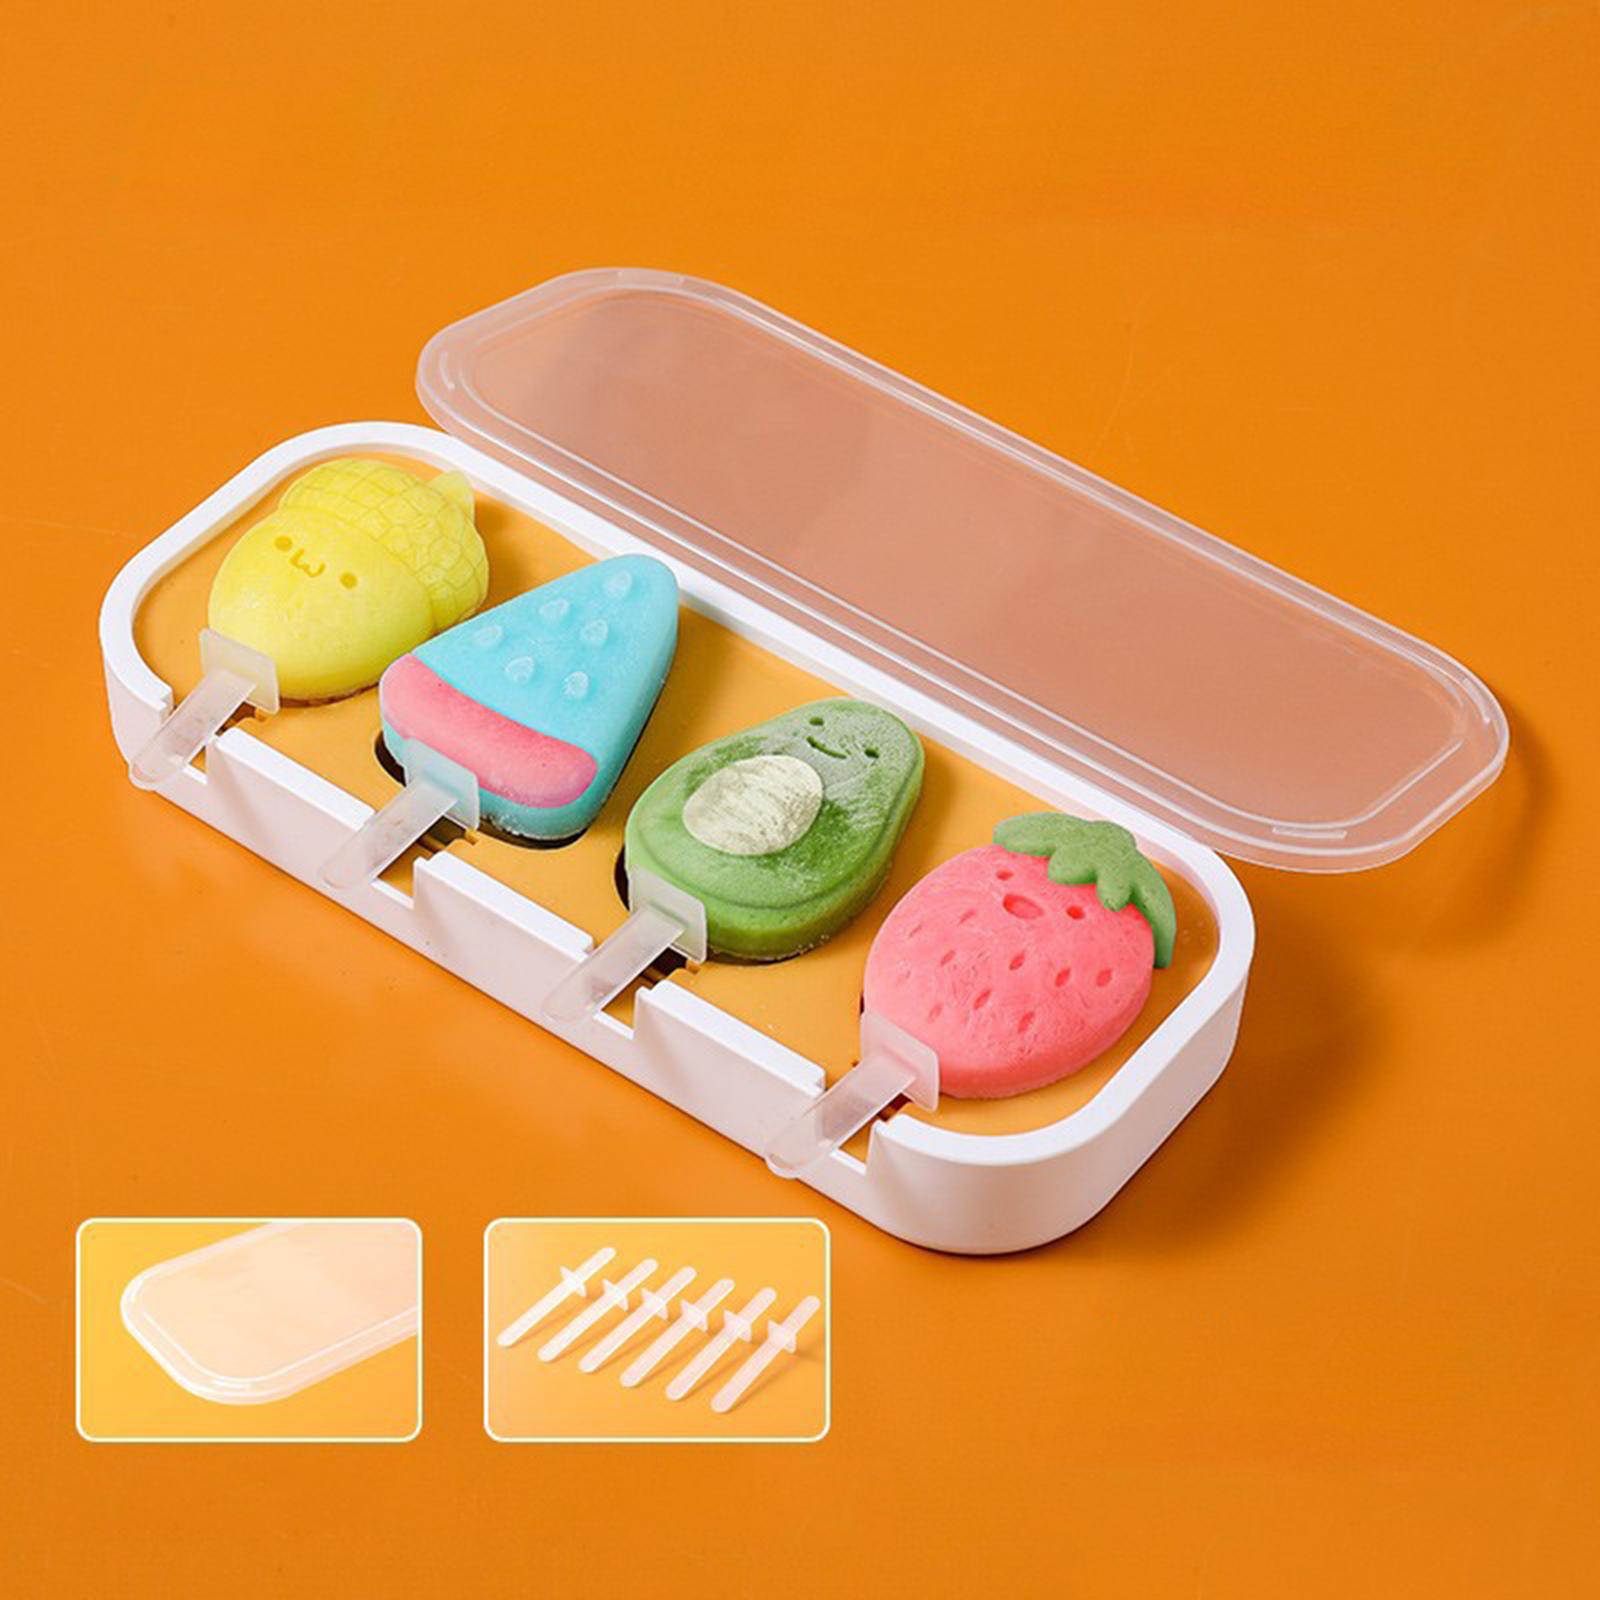 Popsicle Mould Cartoon Easy to Clean with Reusable ice rods Ice Cube Maker White yellow